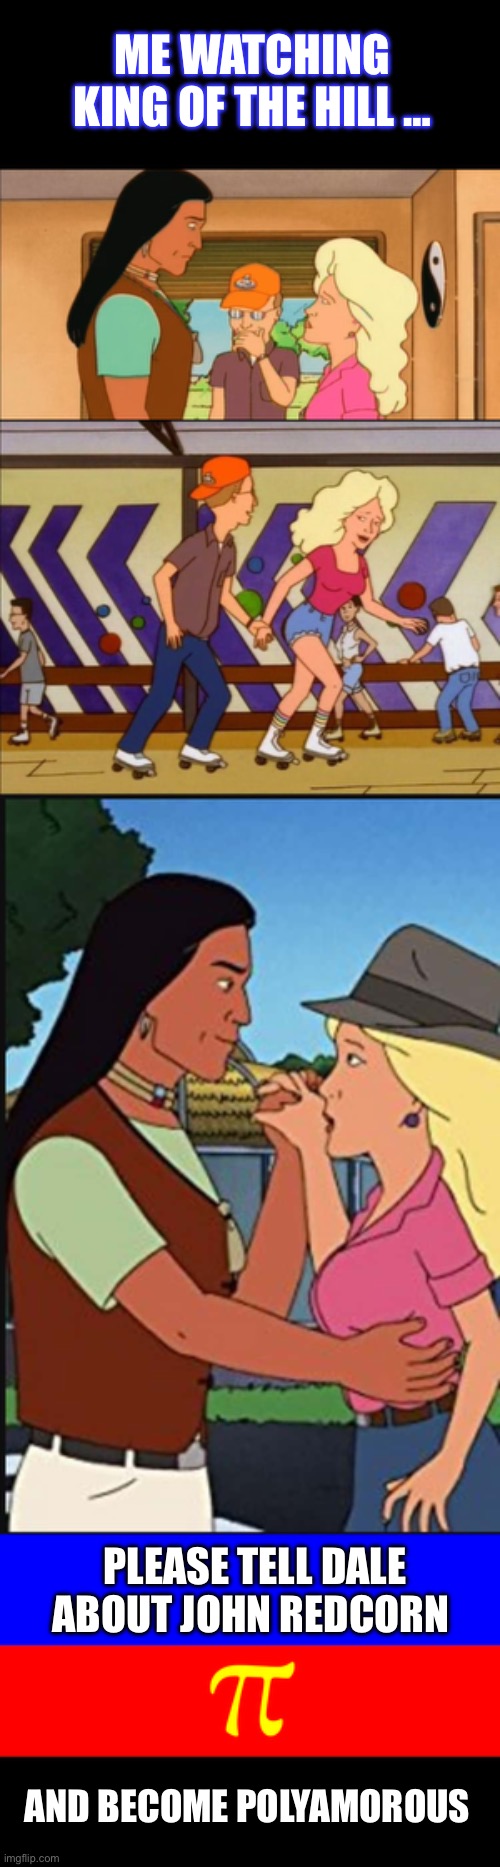 Me Watching King Of The Hill | ME WATCHING KING OF THE HILL …; PLEASE TELL DALE ABOUT JOHN REDCORN; AND BECOME POLYAMOROUS | image tagged in polyamory flag,king of the hill,lgbtq,dale gribble,nancy hicks gribble,john redcorn | made w/ Imgflip meme maker